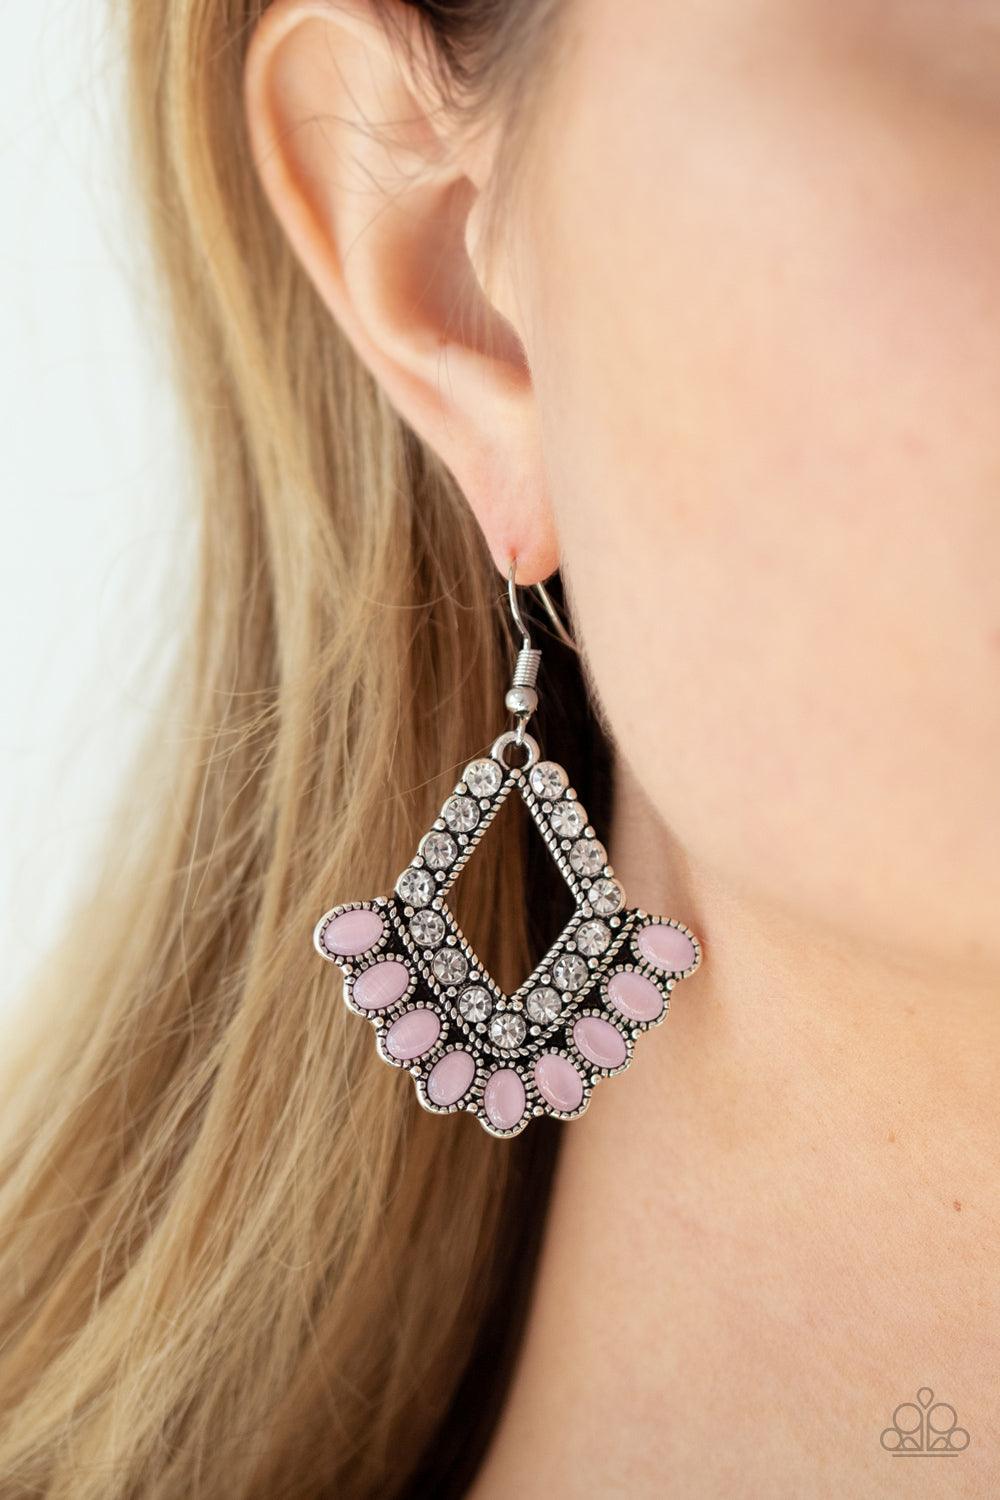 Reflective Rhinestones - Pink & Silver Earrings - Paparazzi Accessories